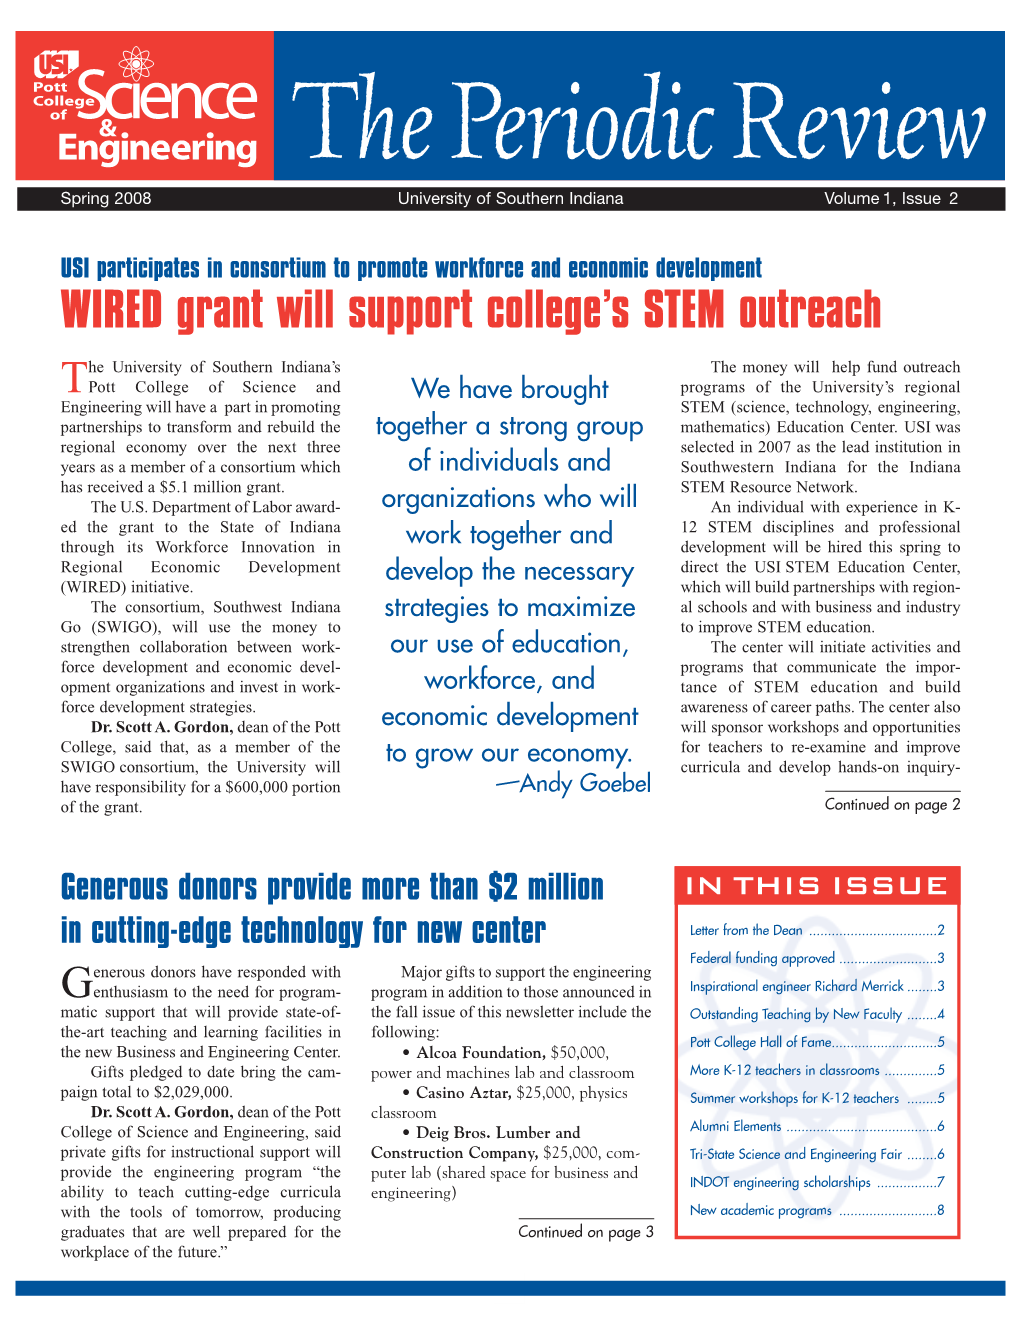 WIRED Grant Will Support College's